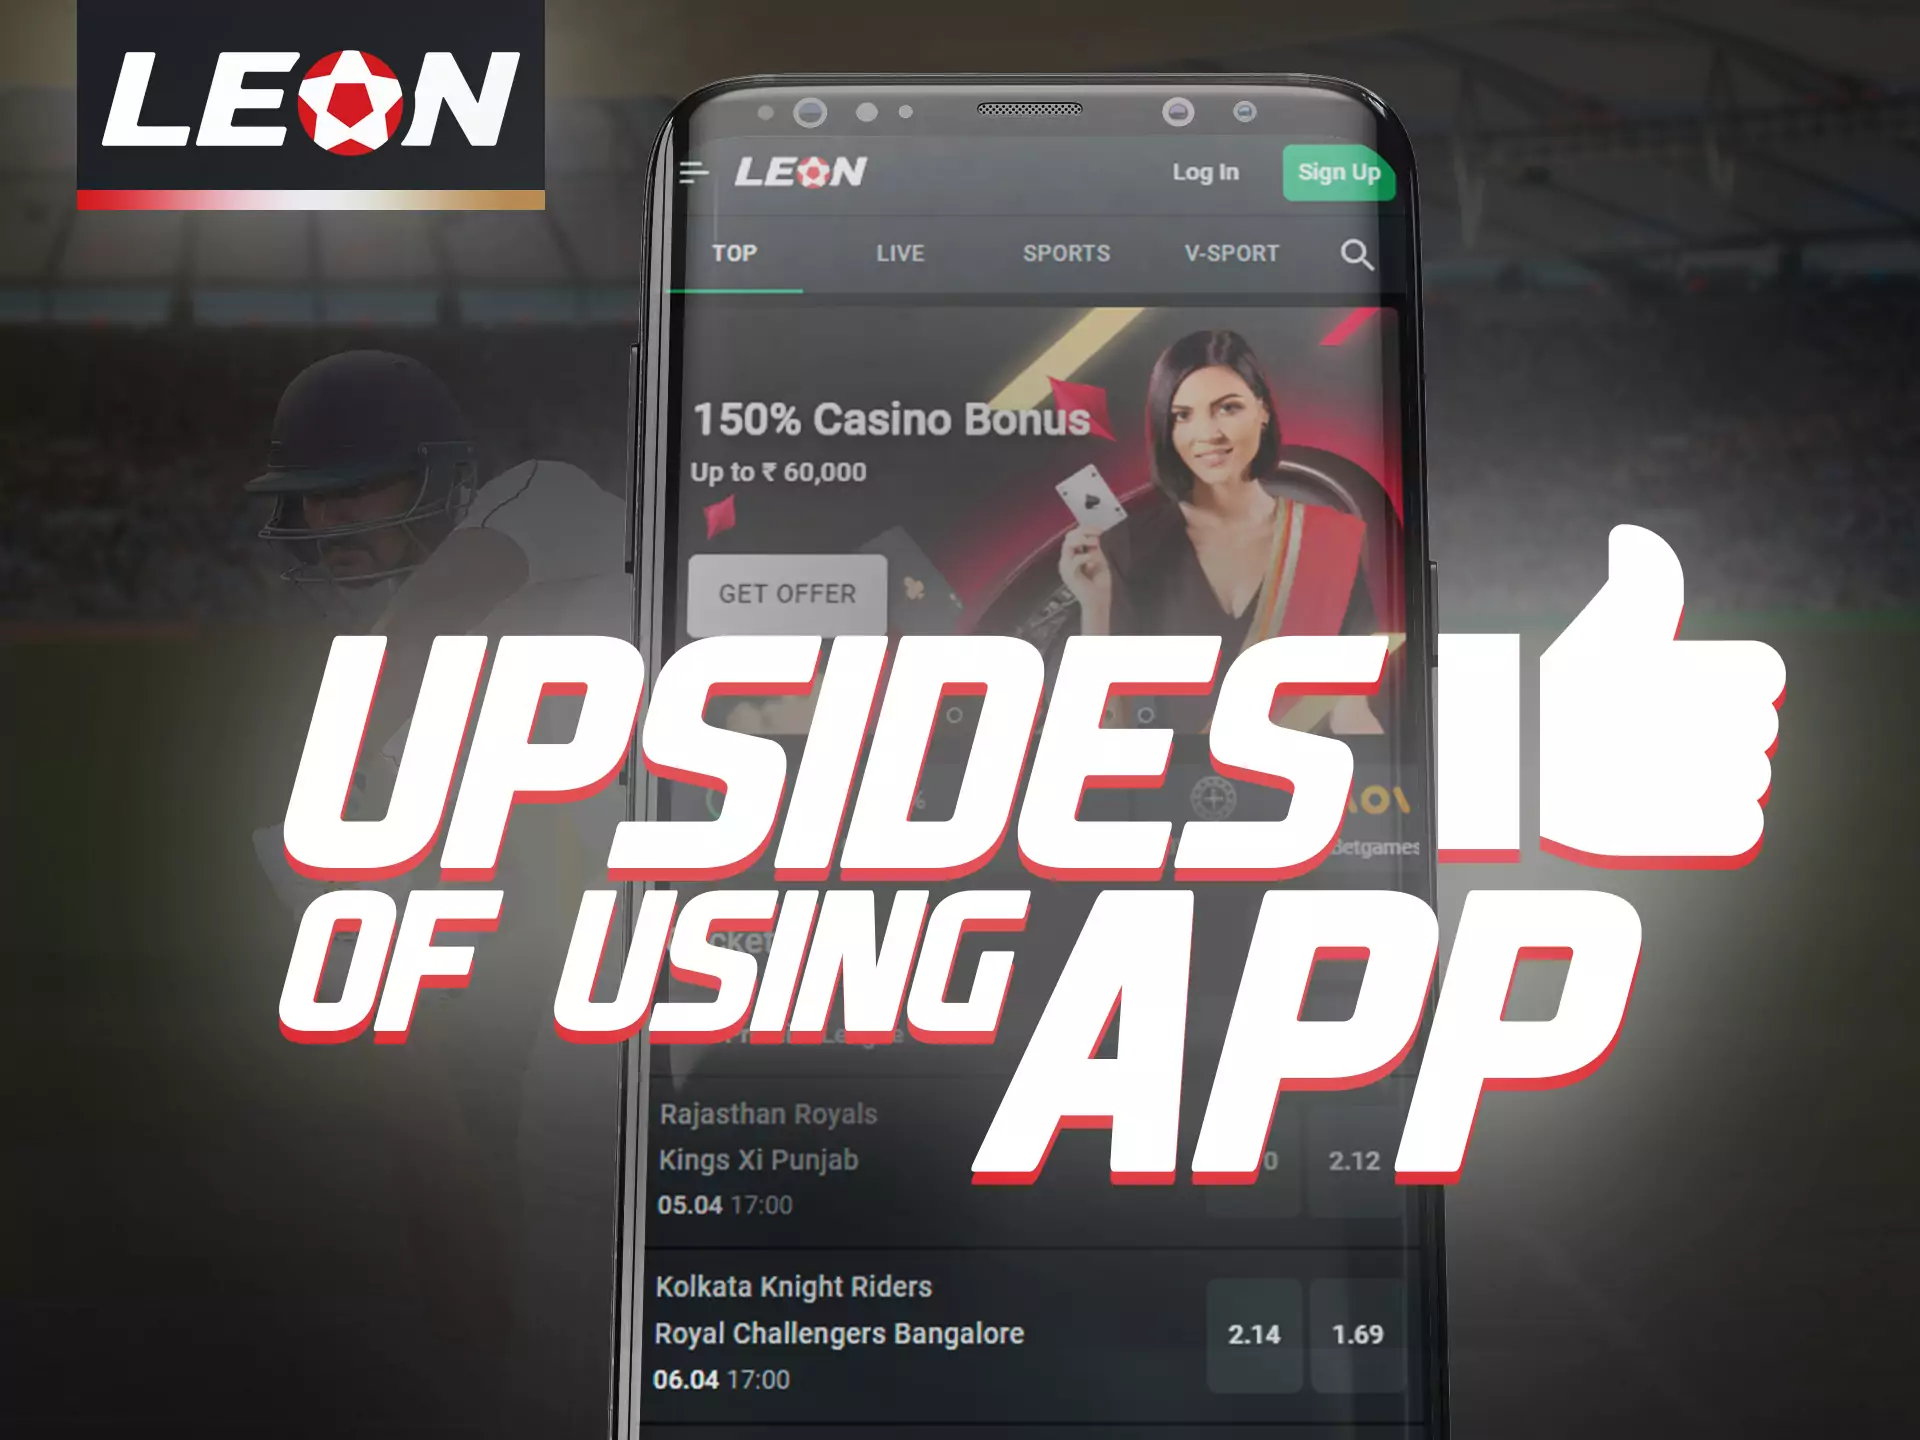 Learn about the upsides of the Leonbet app.